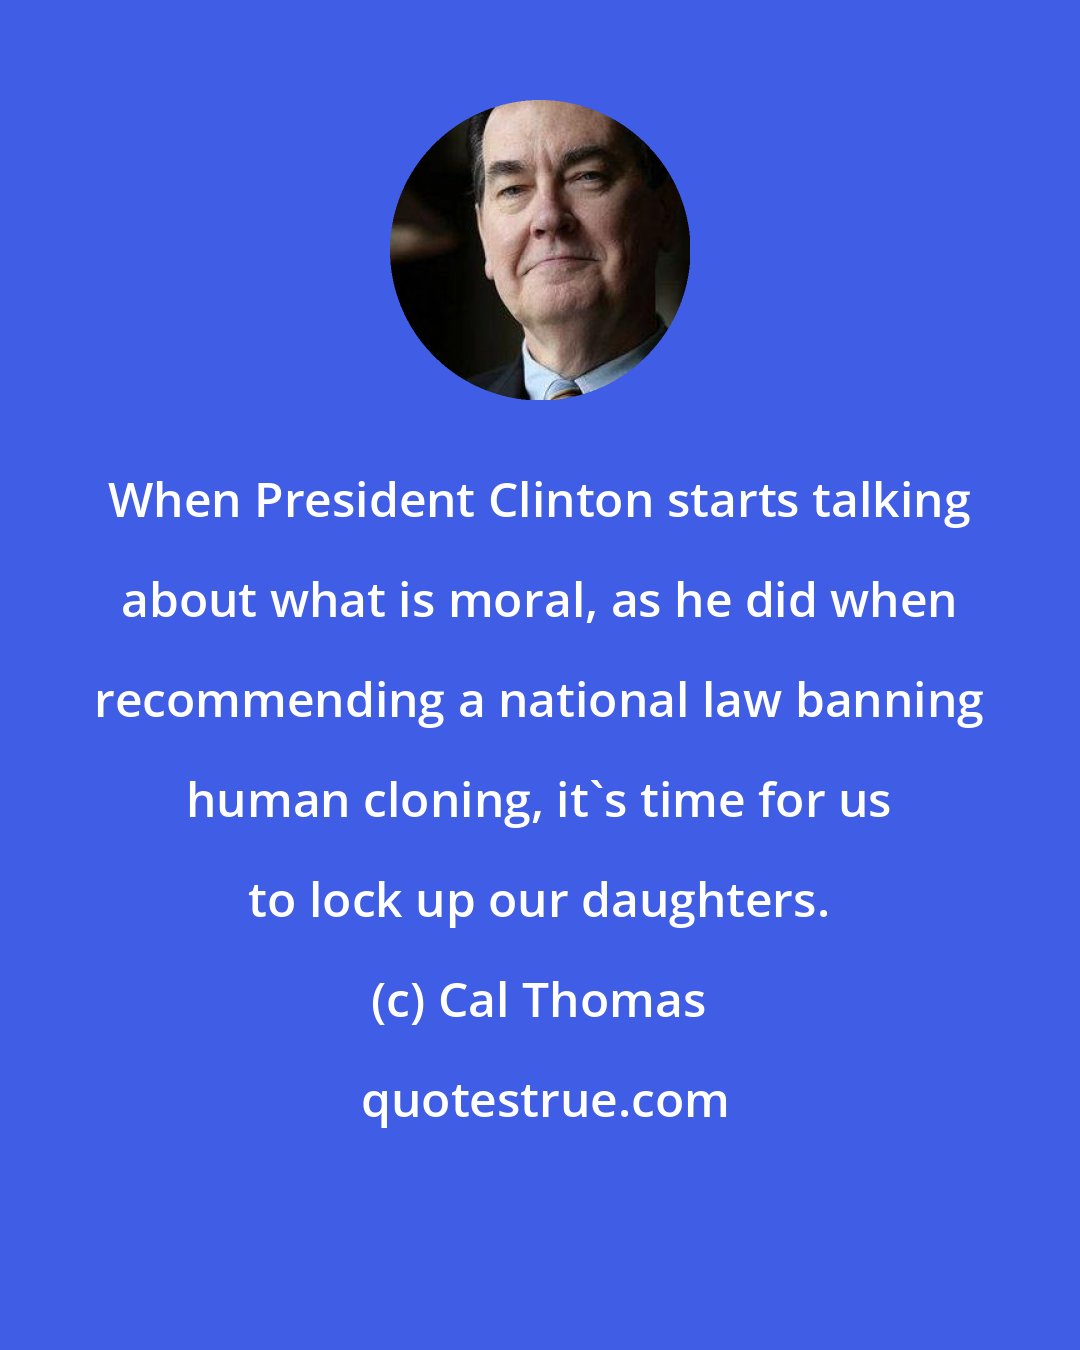 Cal Thomas: When President Clinton starts talking about what is moral, as he did when recommending a national law banning human cloning, it's time for us to lock up our daughters.